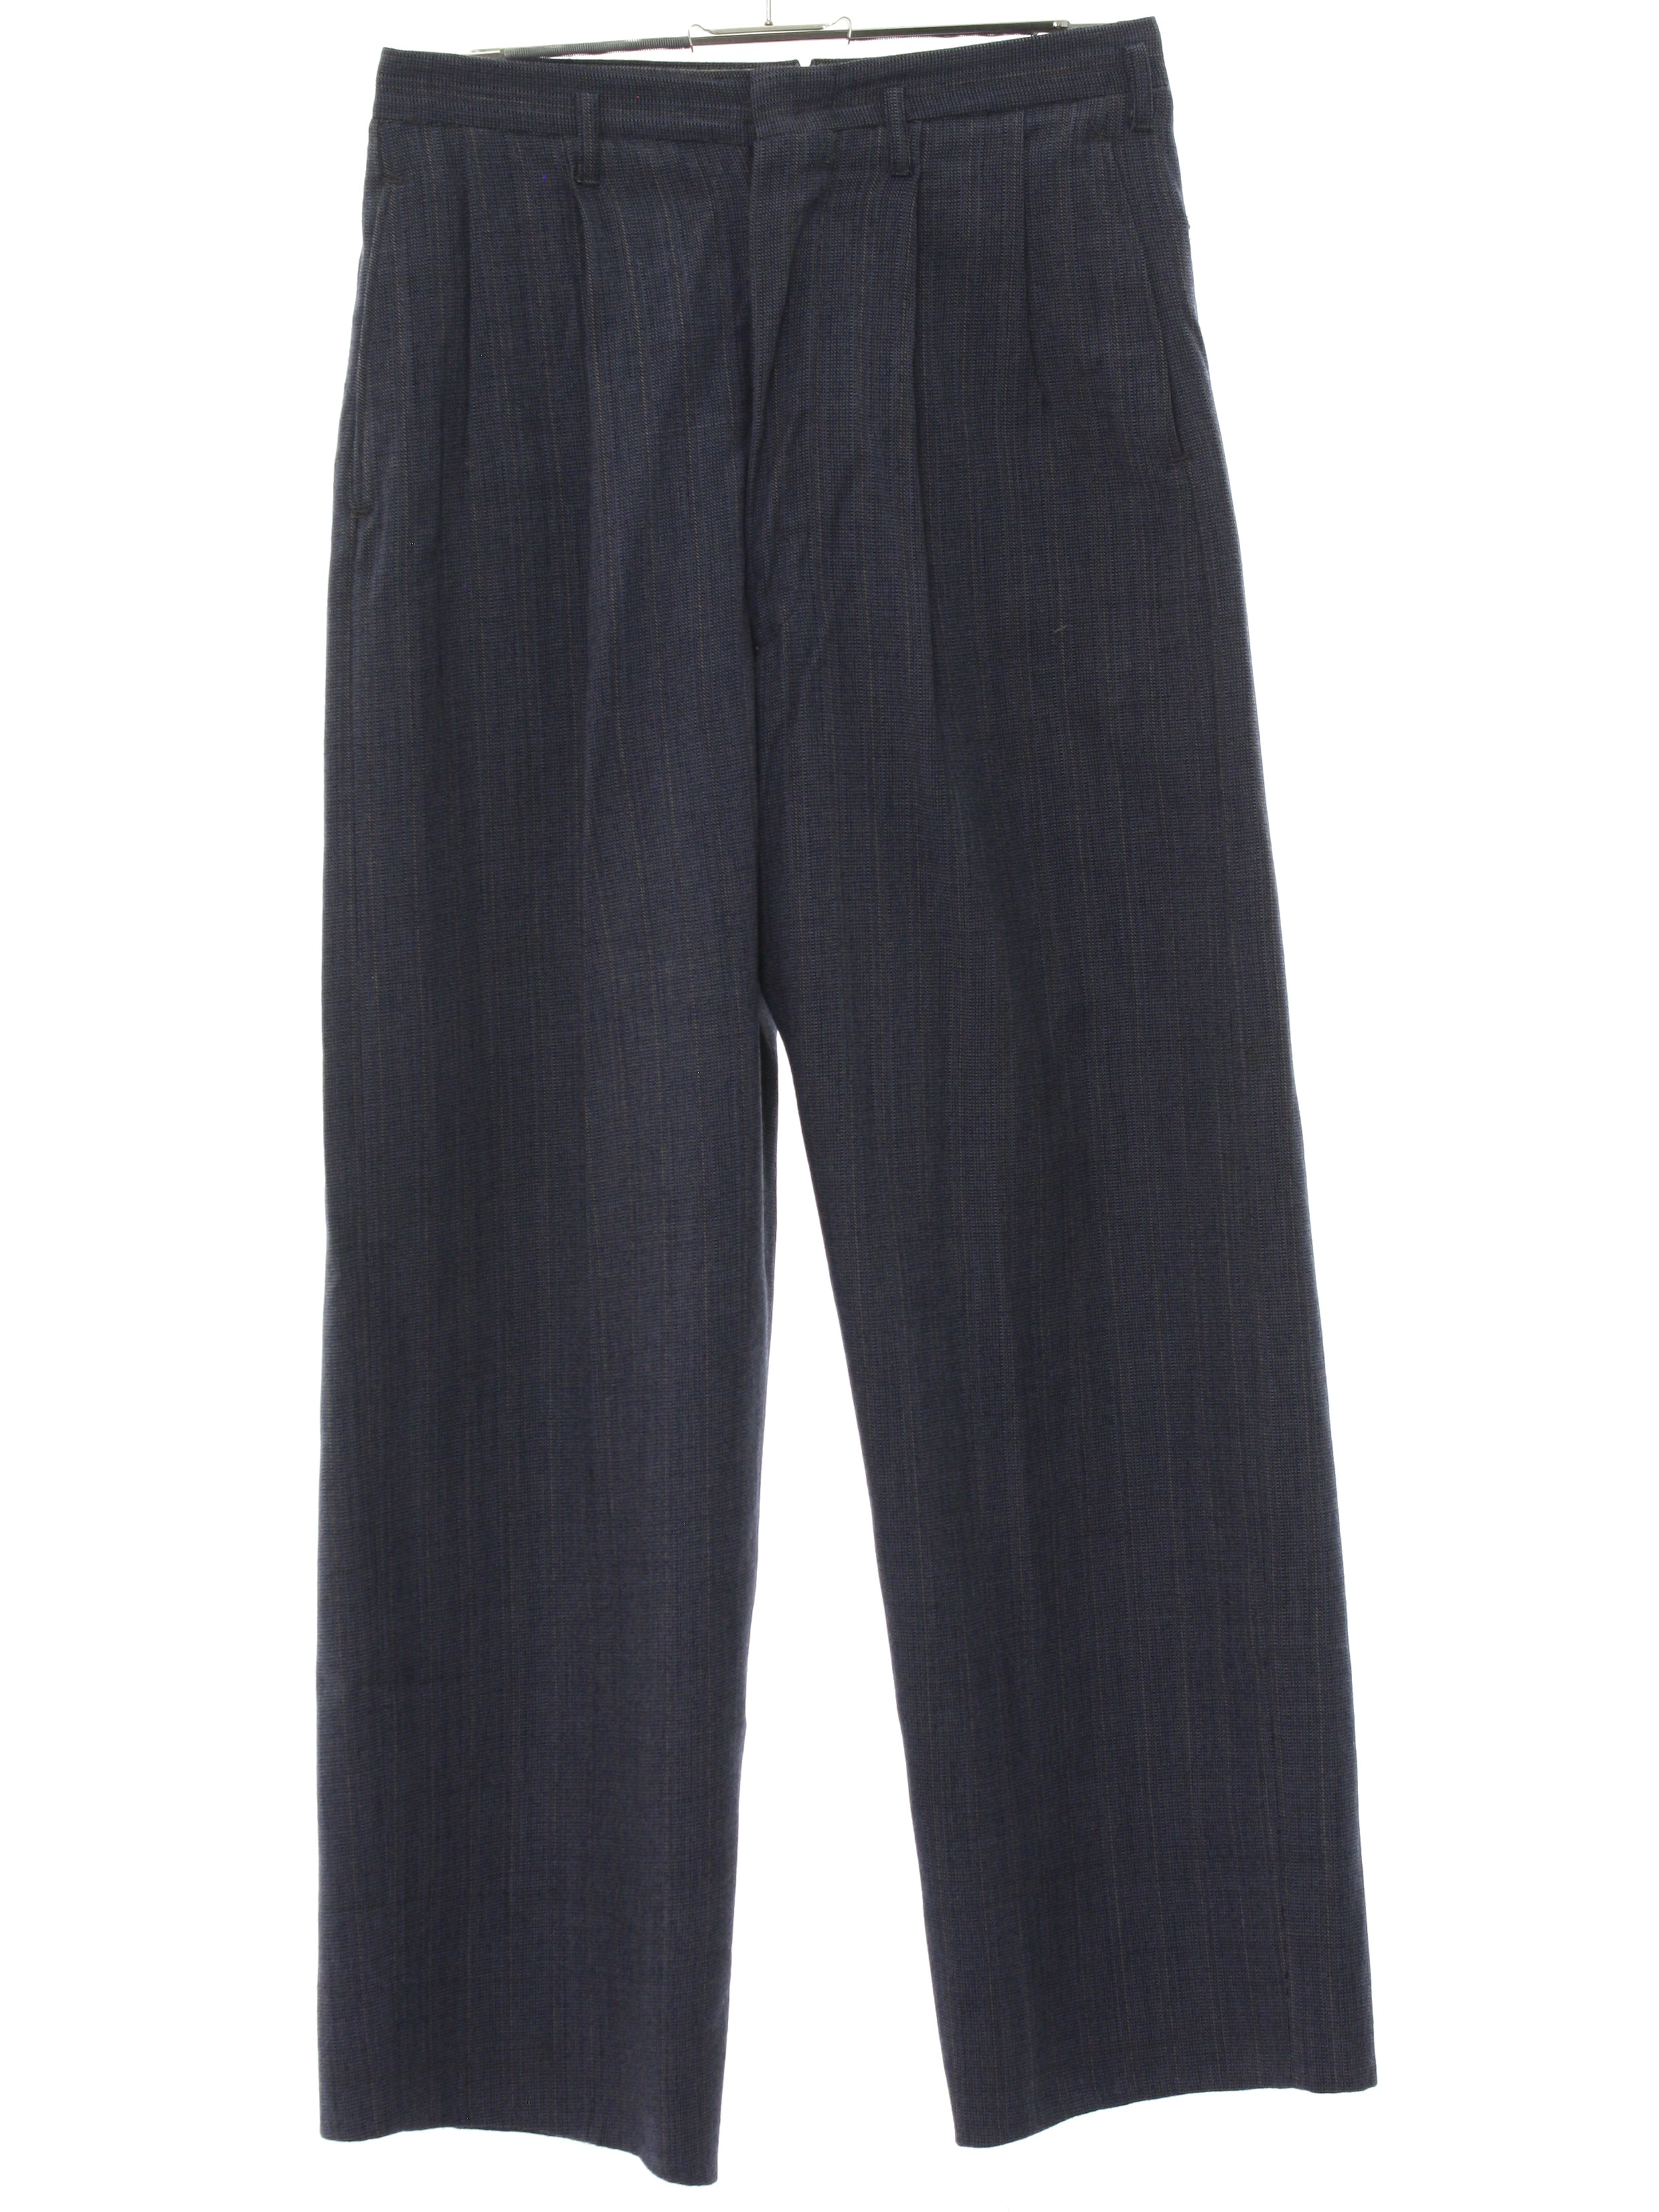 No Label Forties Vintage Pants: Late 40s -No Label- Mens navy blue ...